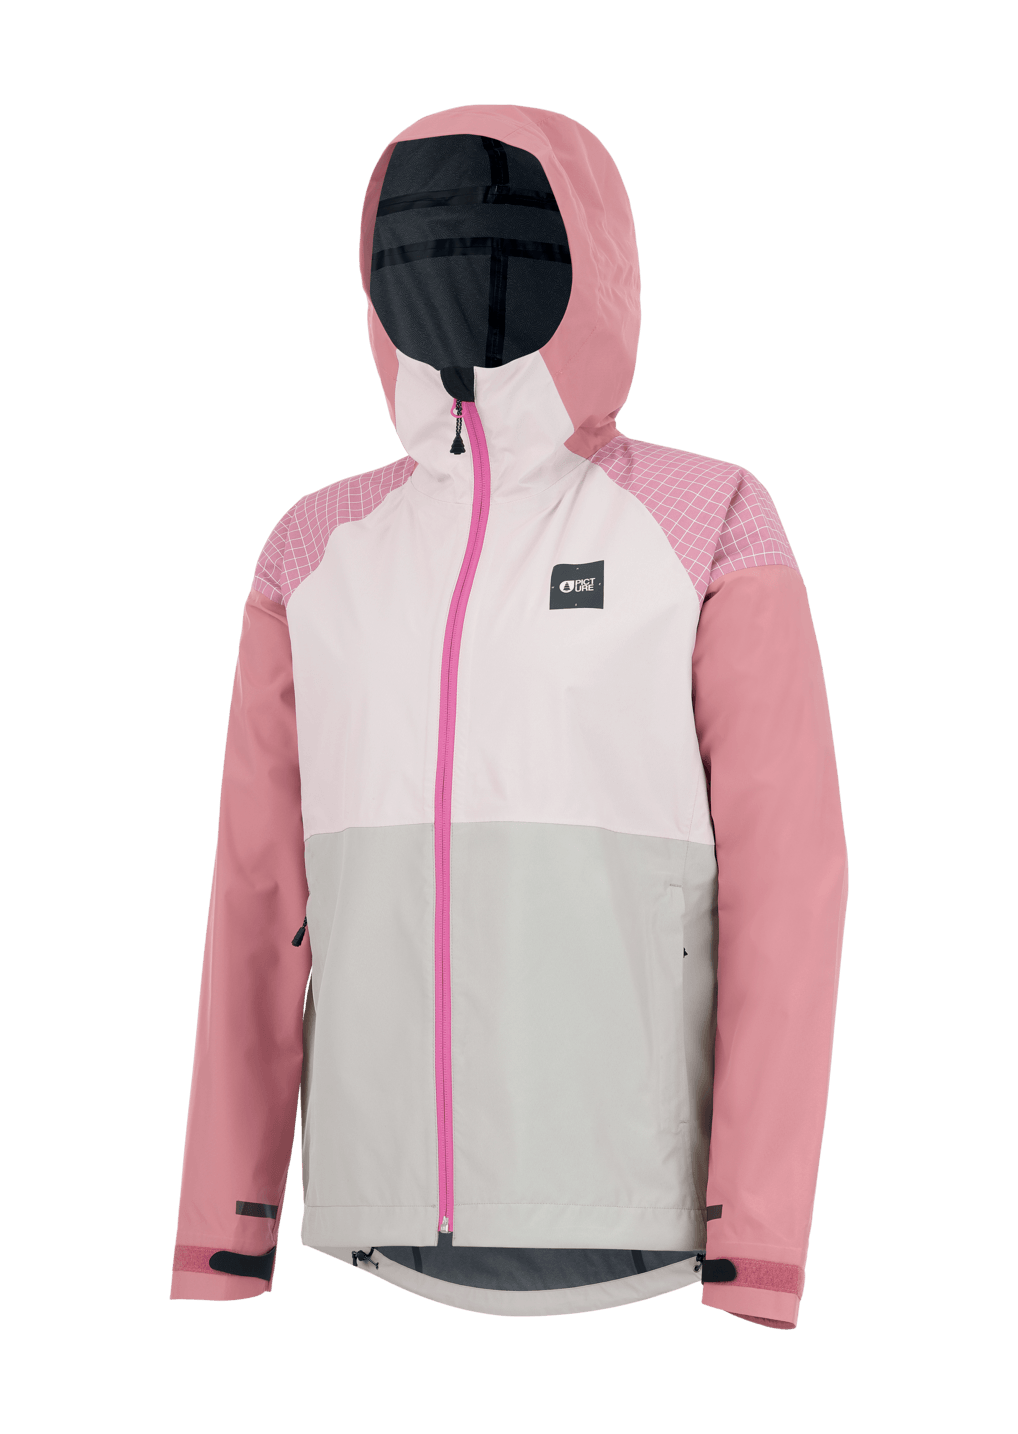 Picture Organic Women's Abstral 2.5L Jacket - Recycled Polyester, Ash rose / S